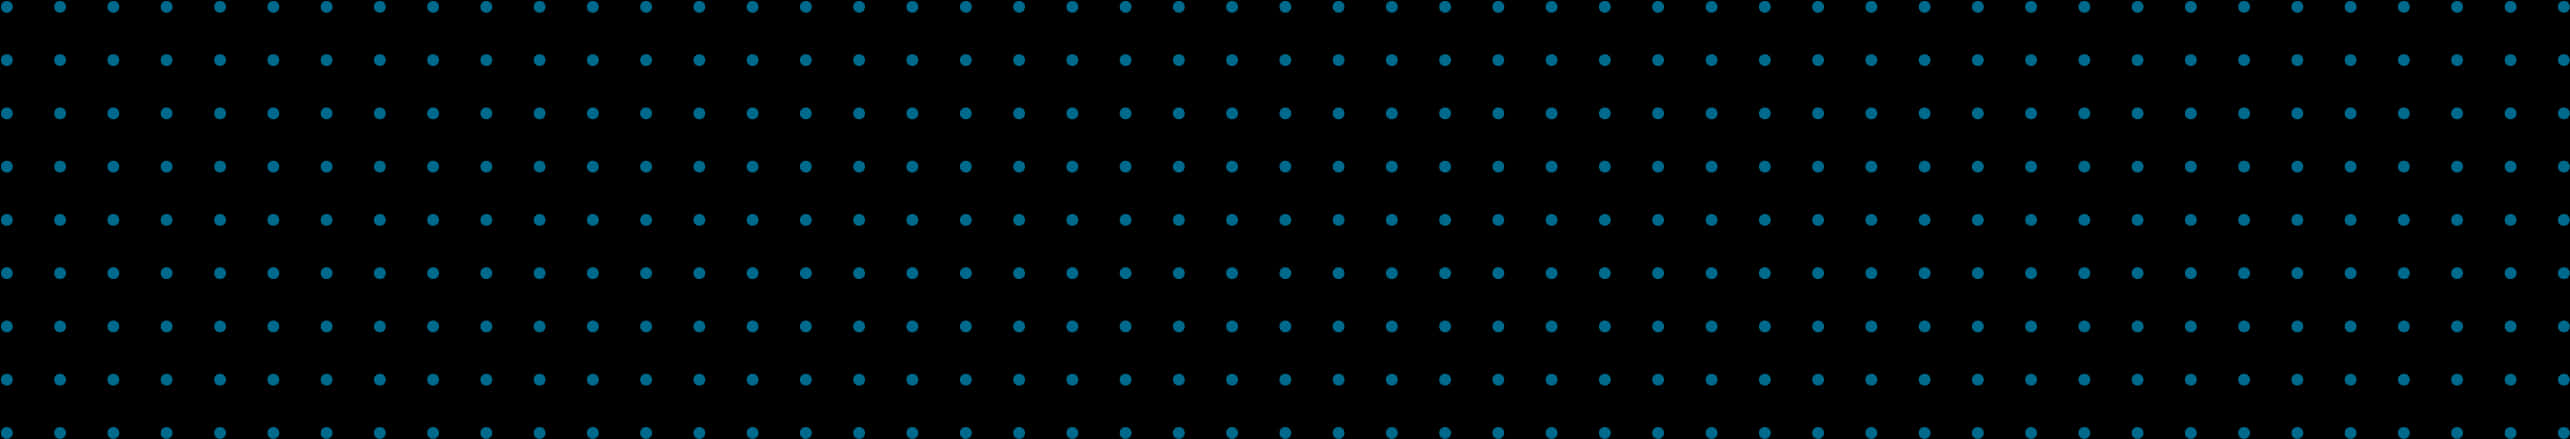 Abstract Blue Dot Pattern PNG